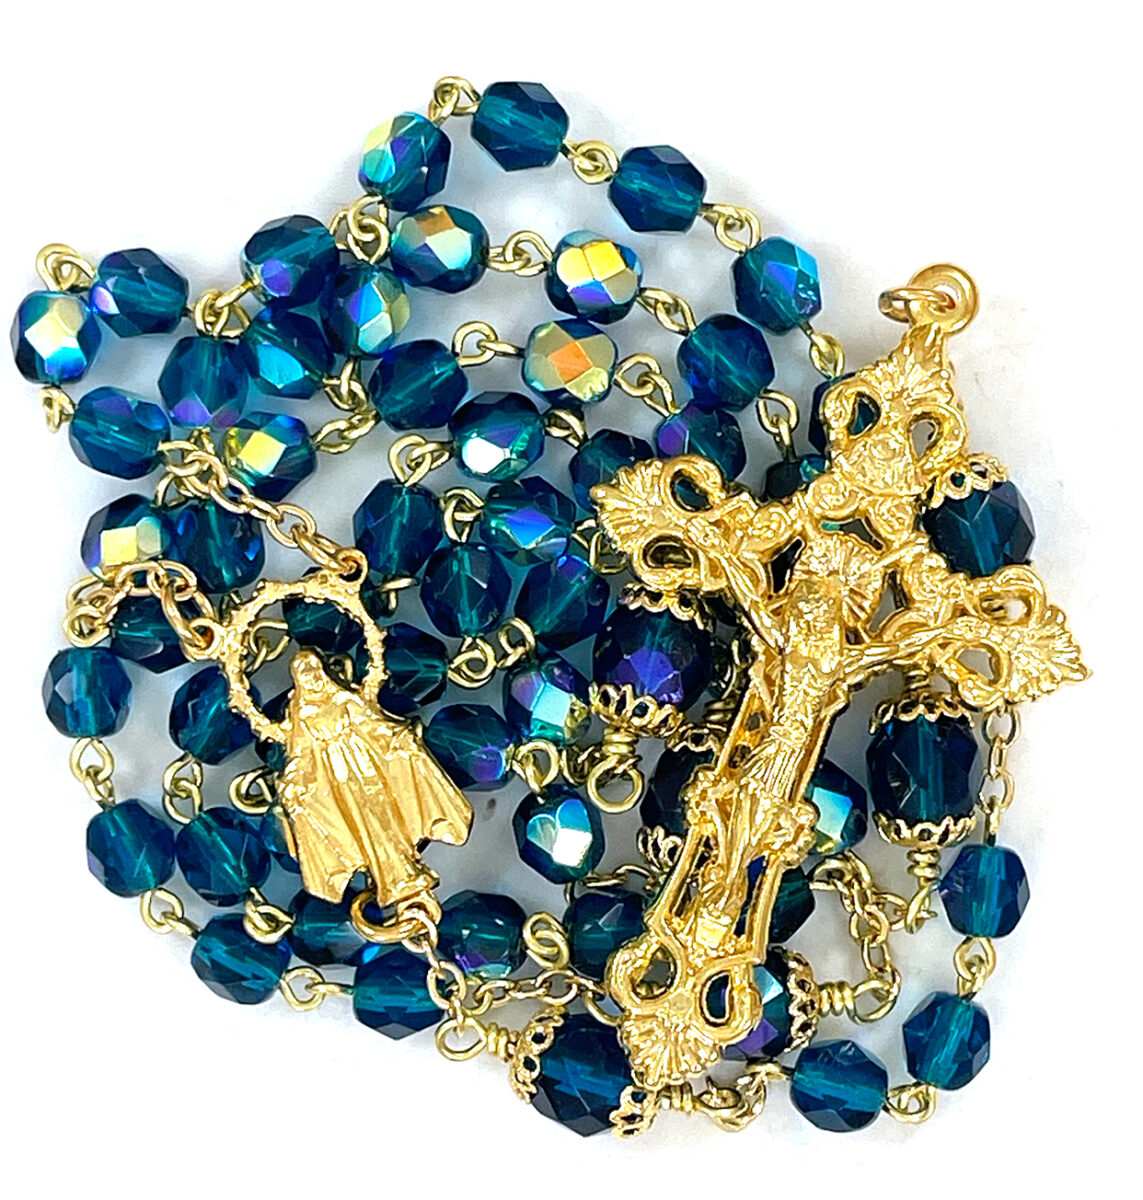 Teal and Gold Rosary ($29.99 CAD)